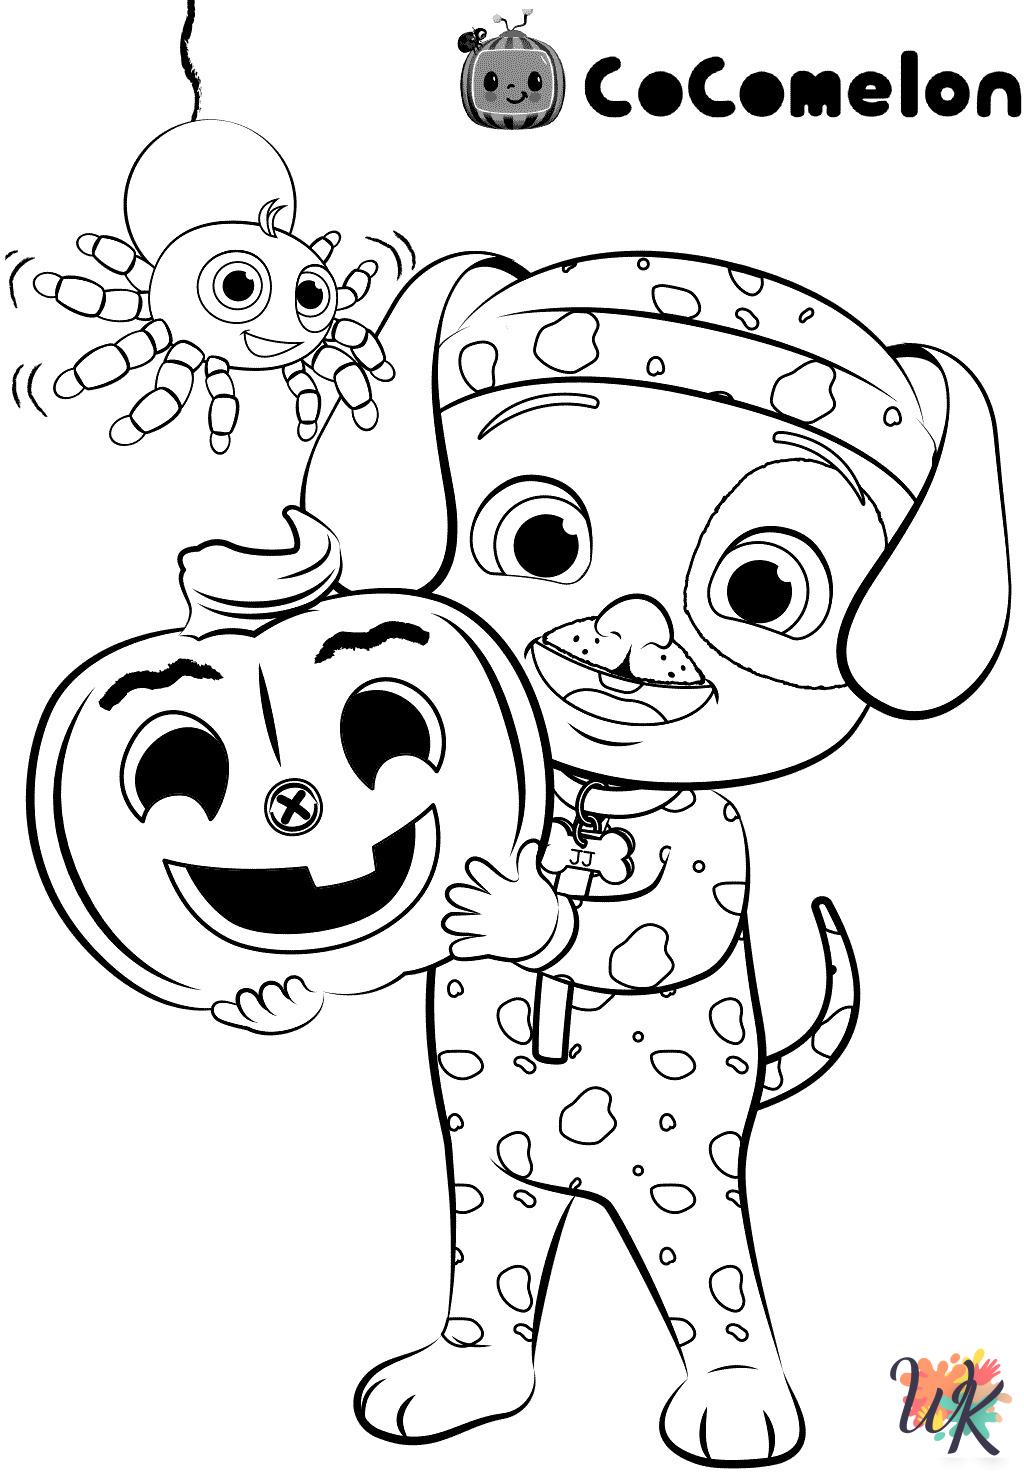 detailed Cocomelon coloring pages for adults